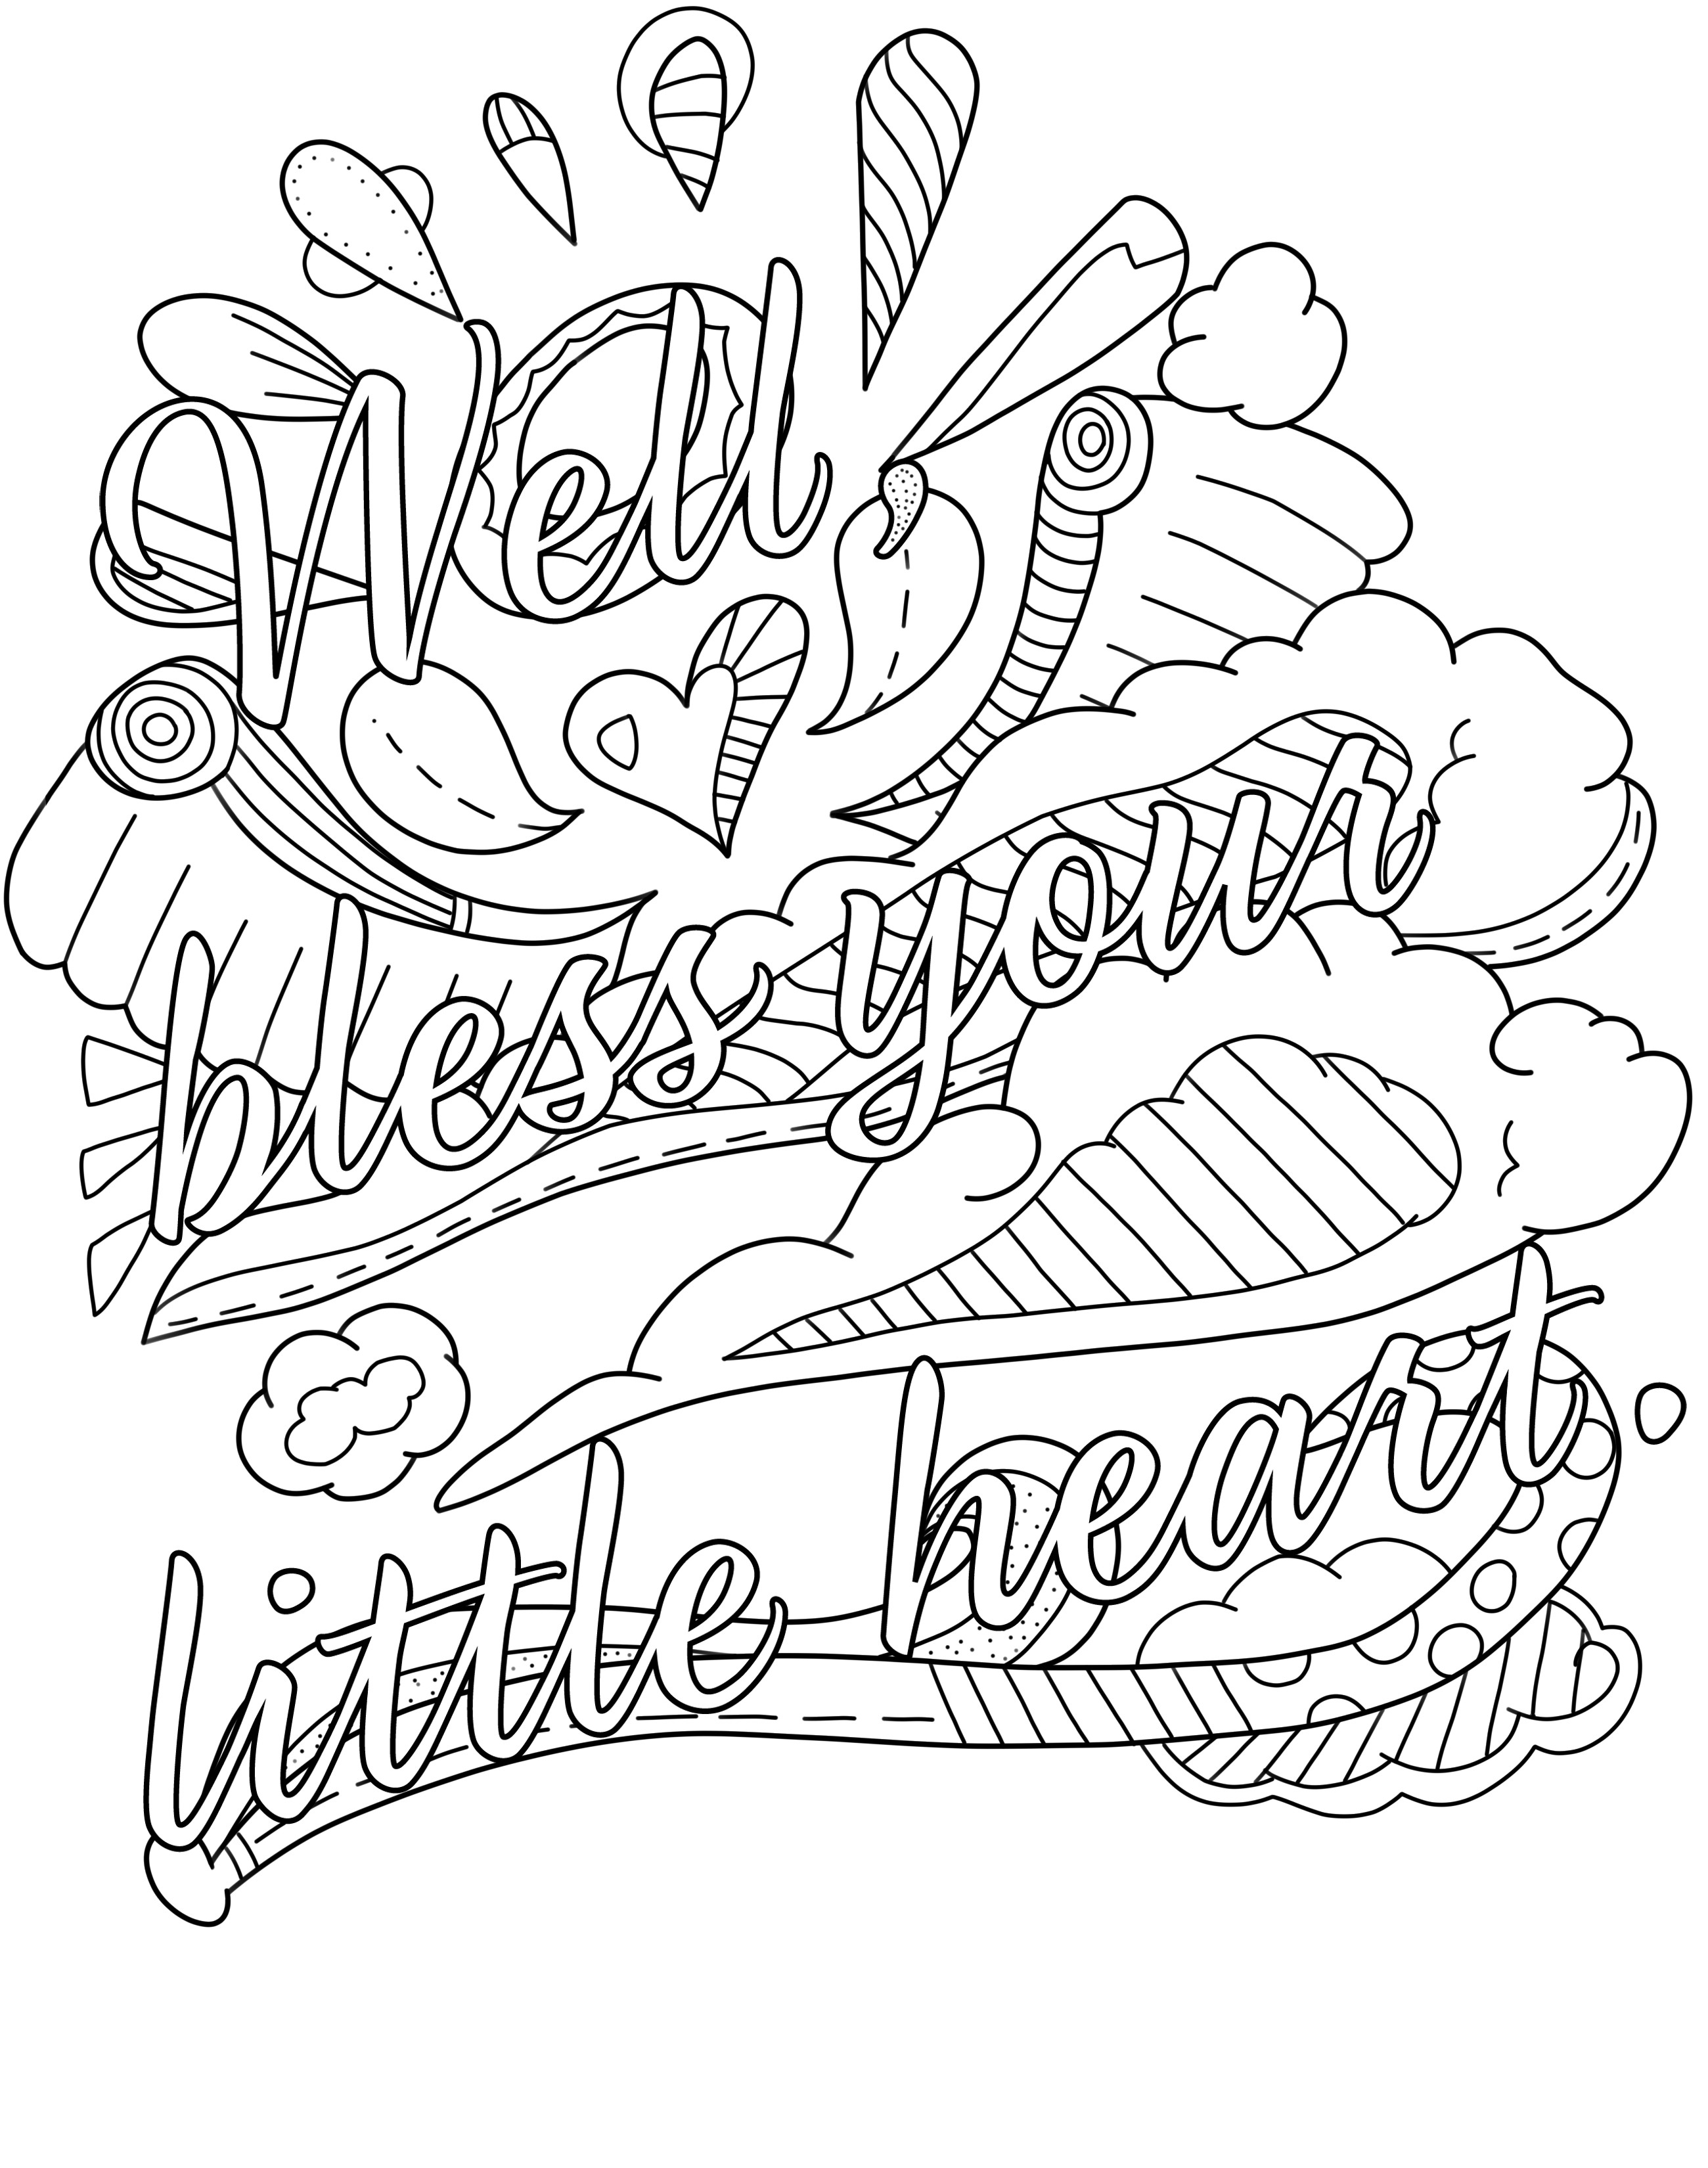 Swear Word Coloring Pages at GetColorings.com | Free printable